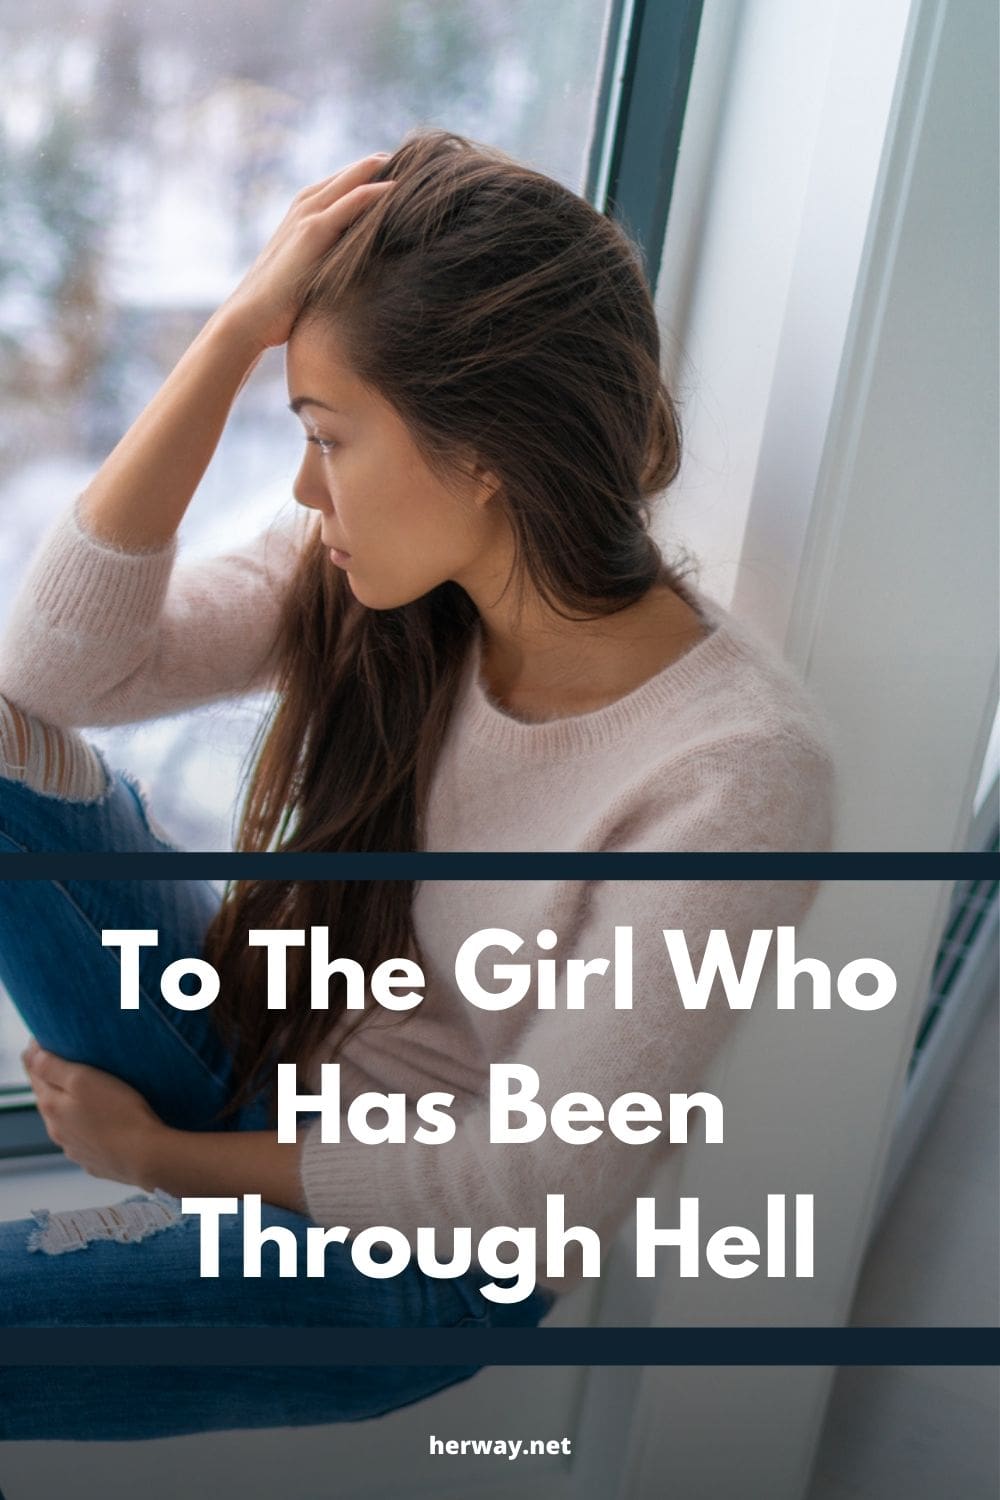 To The Girl Who Has Been Through Hell